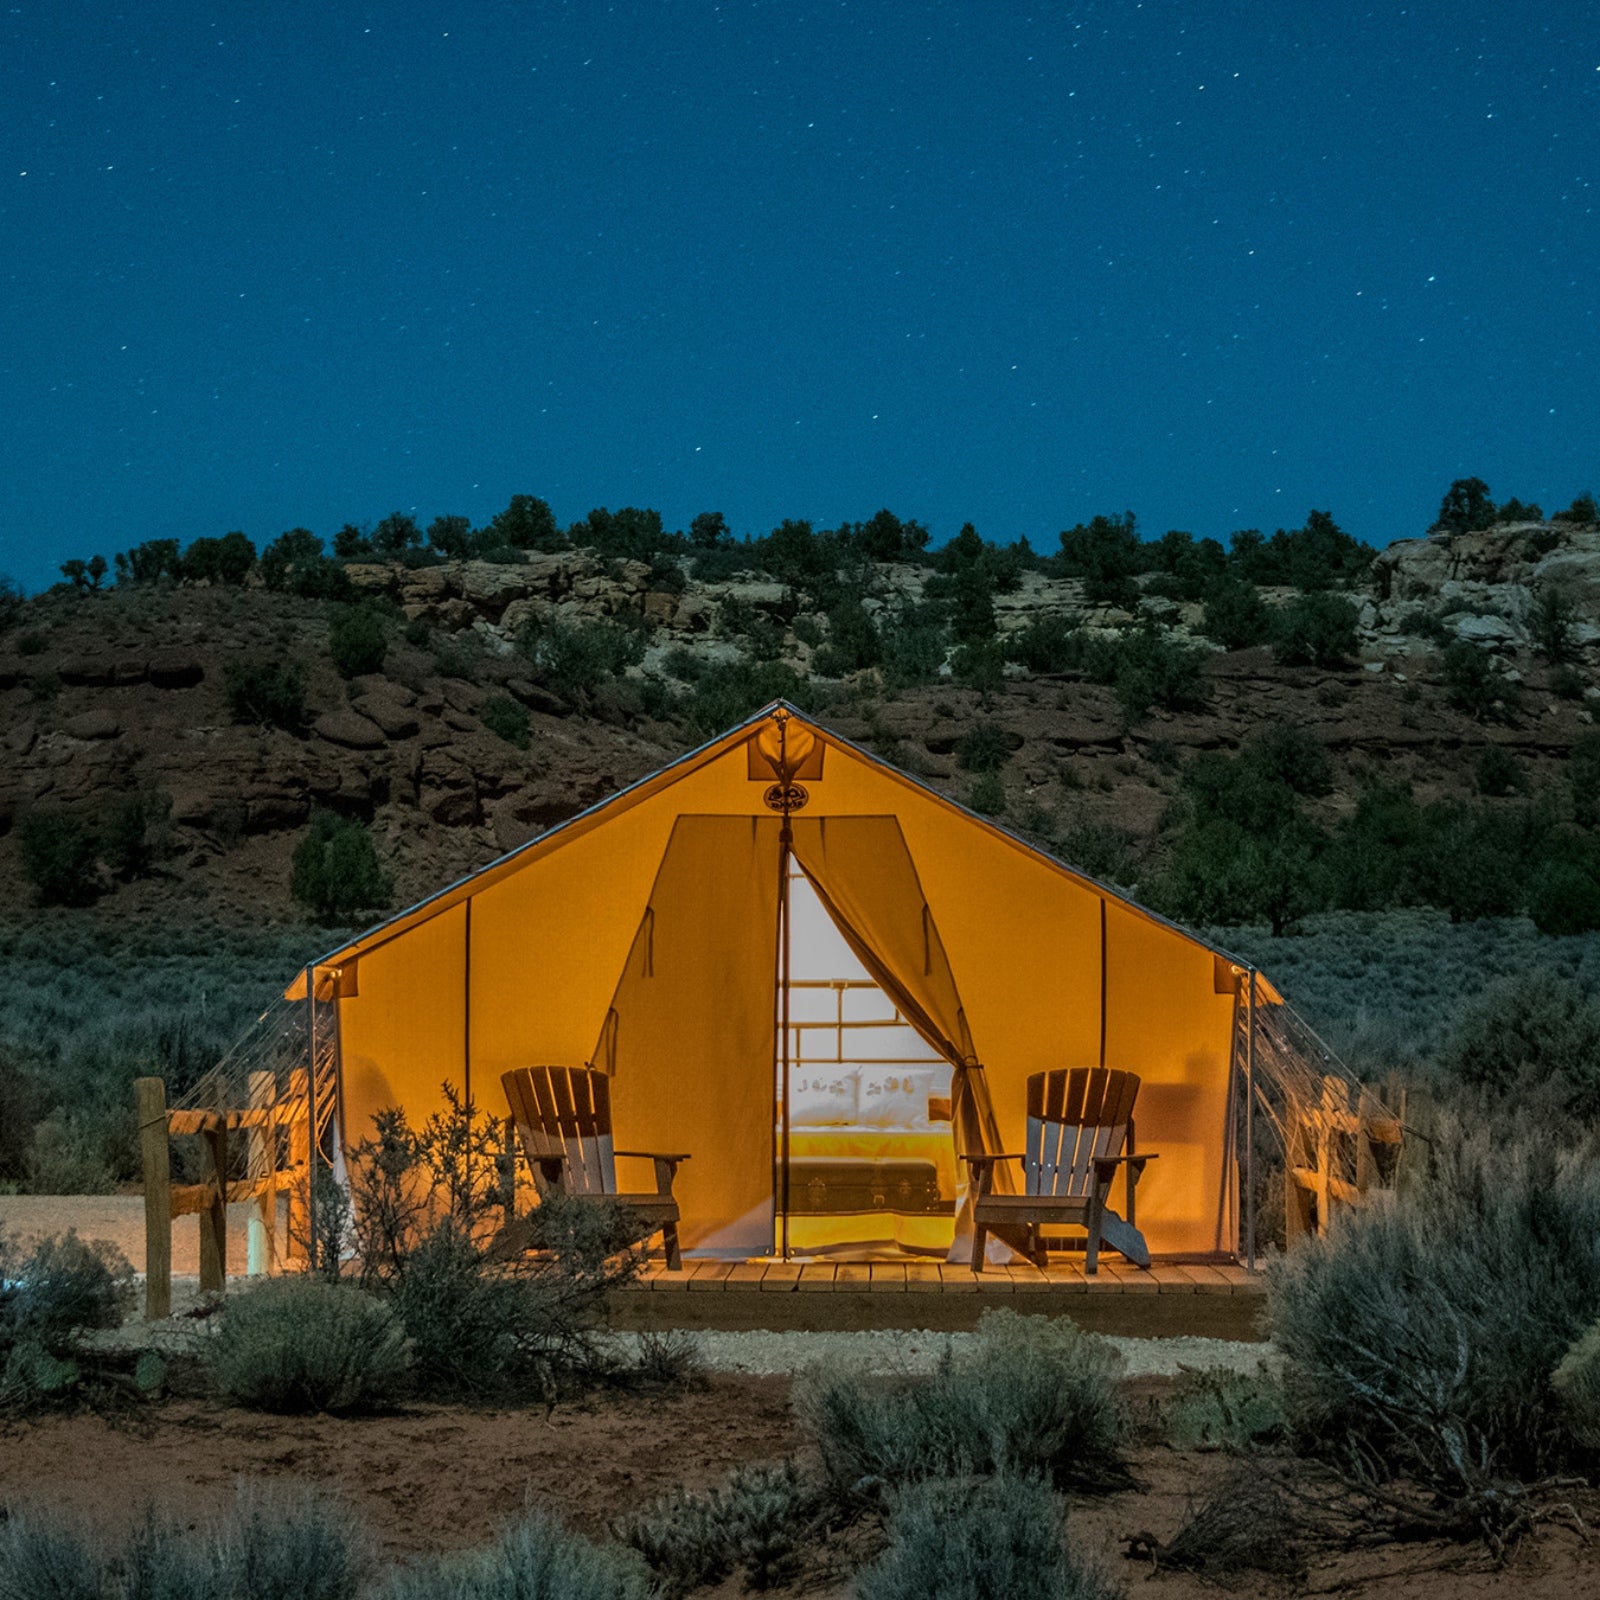 A glowing tent with two camp chairs out front sets a cozy scene amid southwestern Utah's desert.